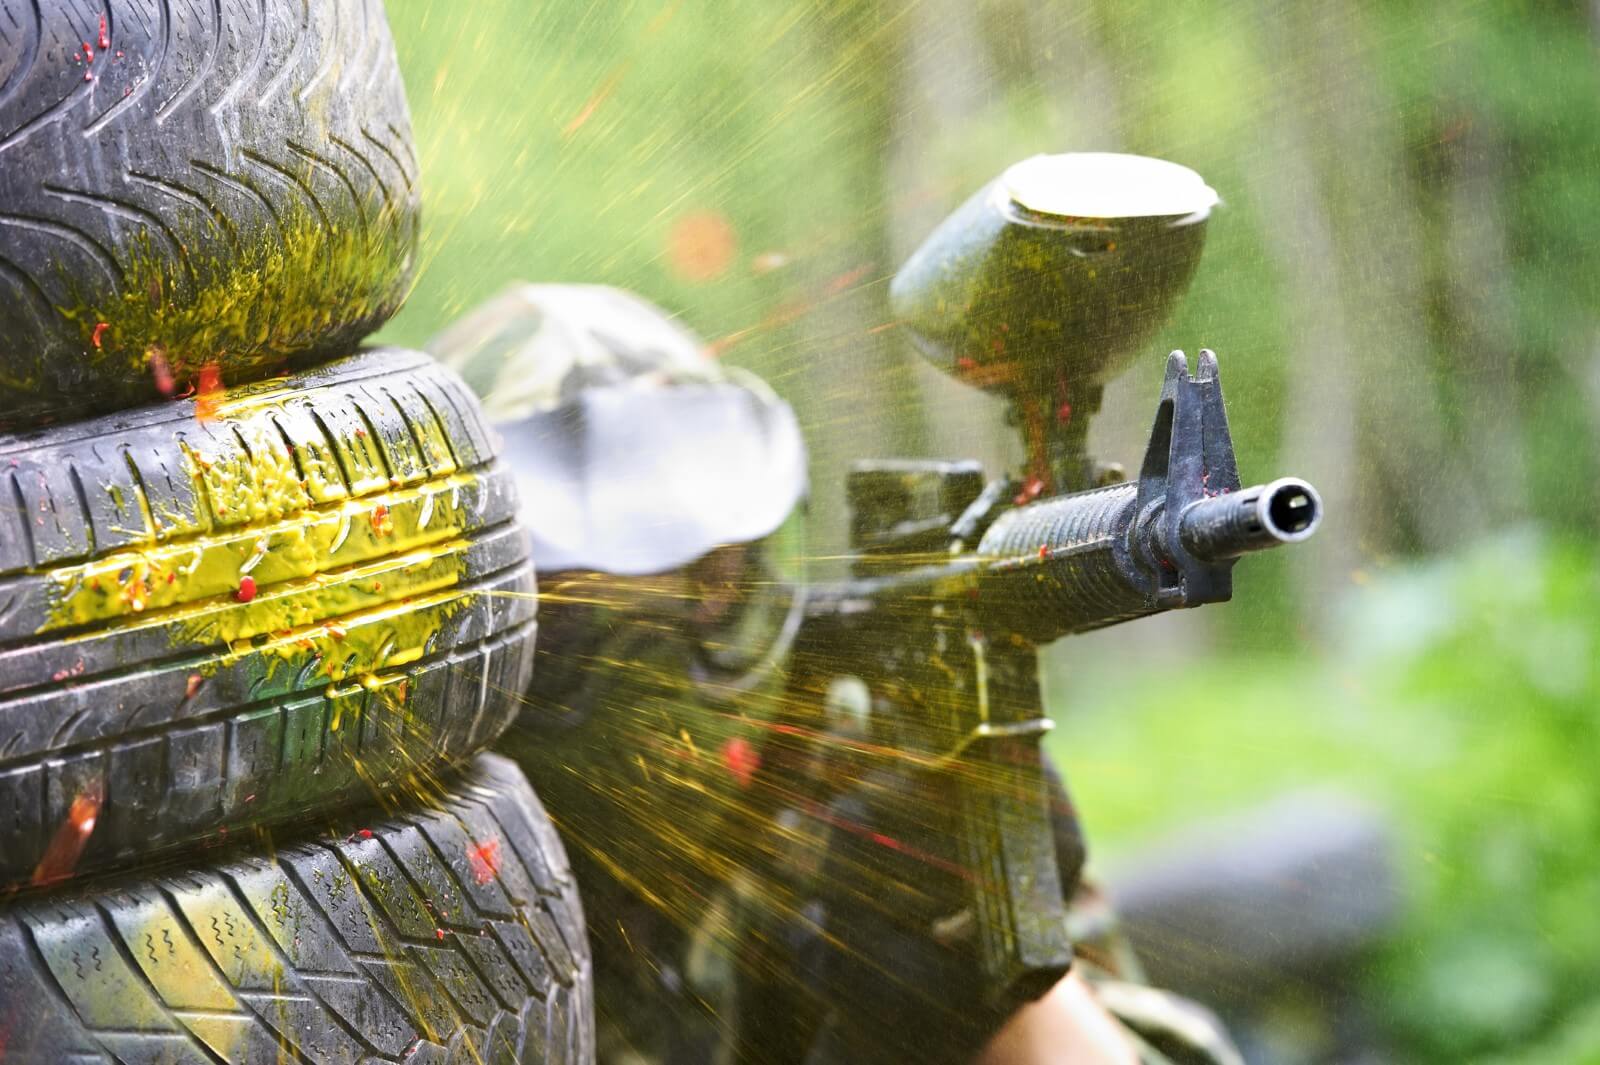 A paintball player taking aim and ducking for cover.